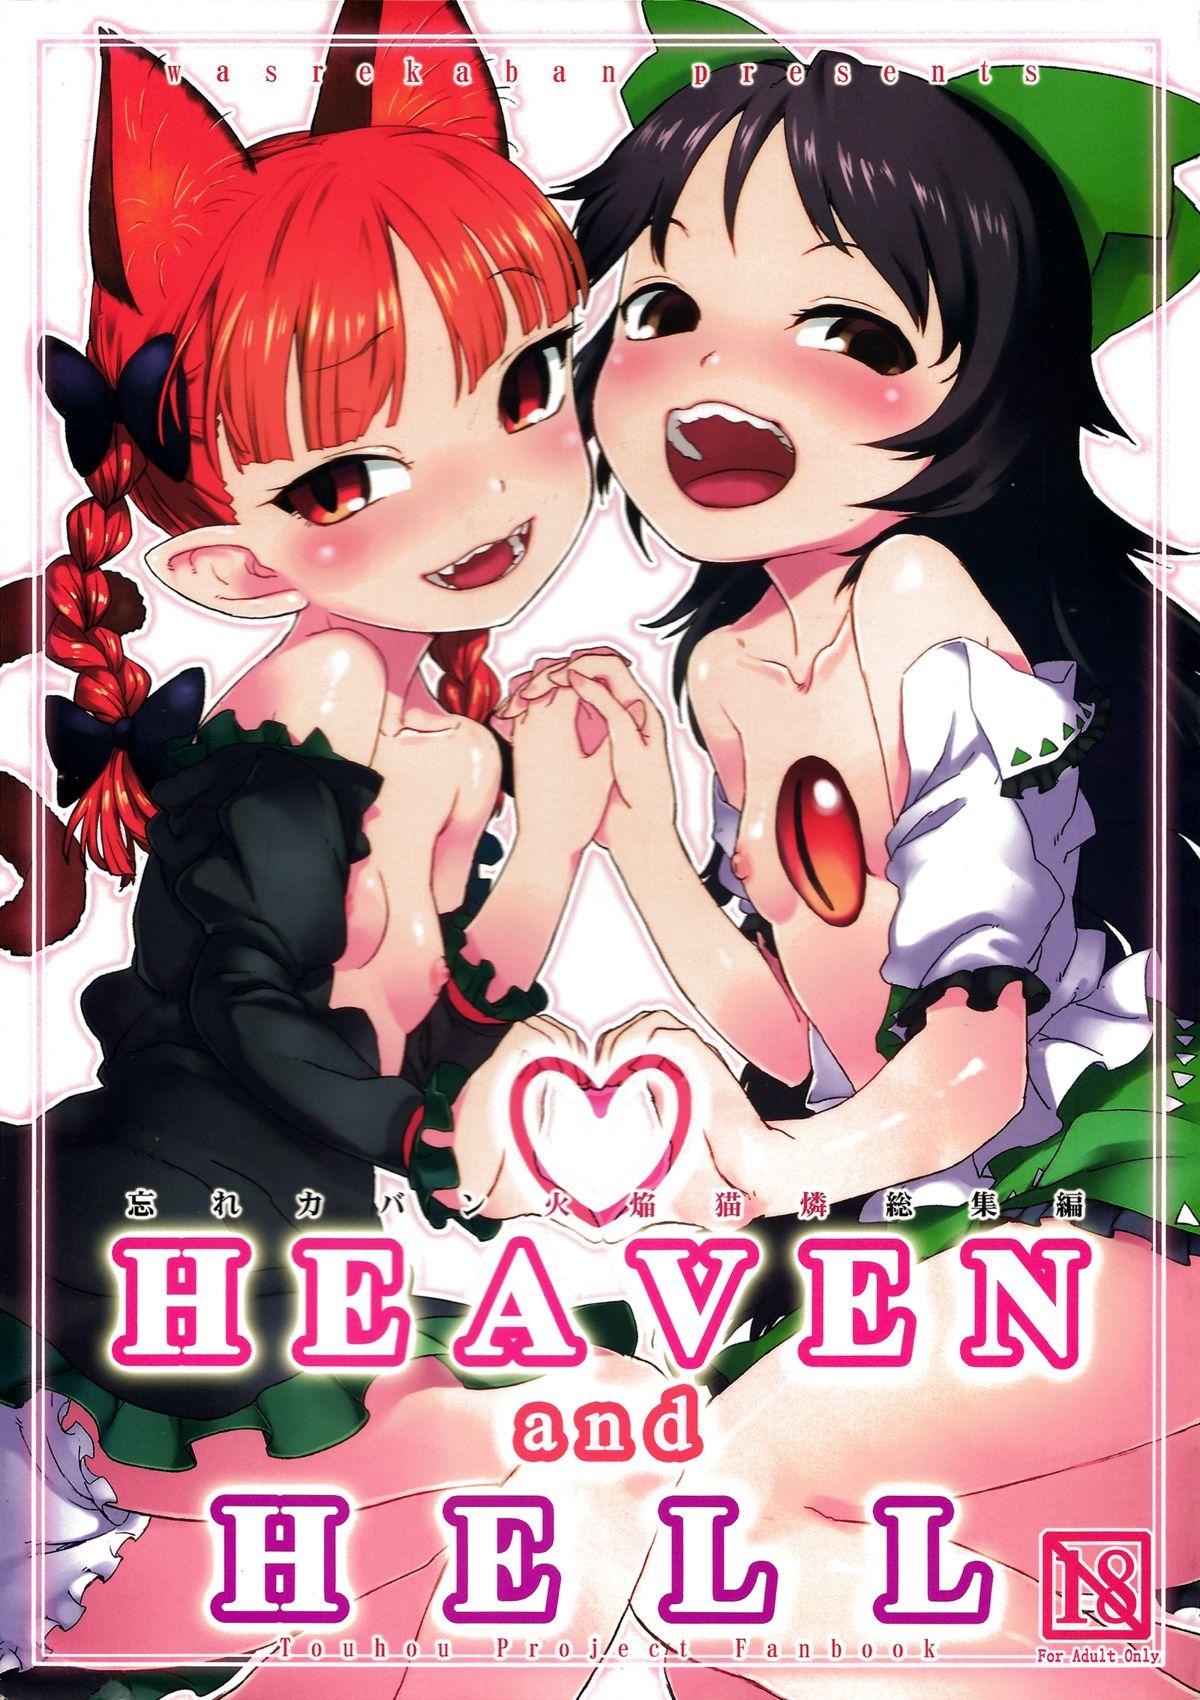 Bus HEAVEN and HELL - Touhou project Tranny Porn - Picture 1